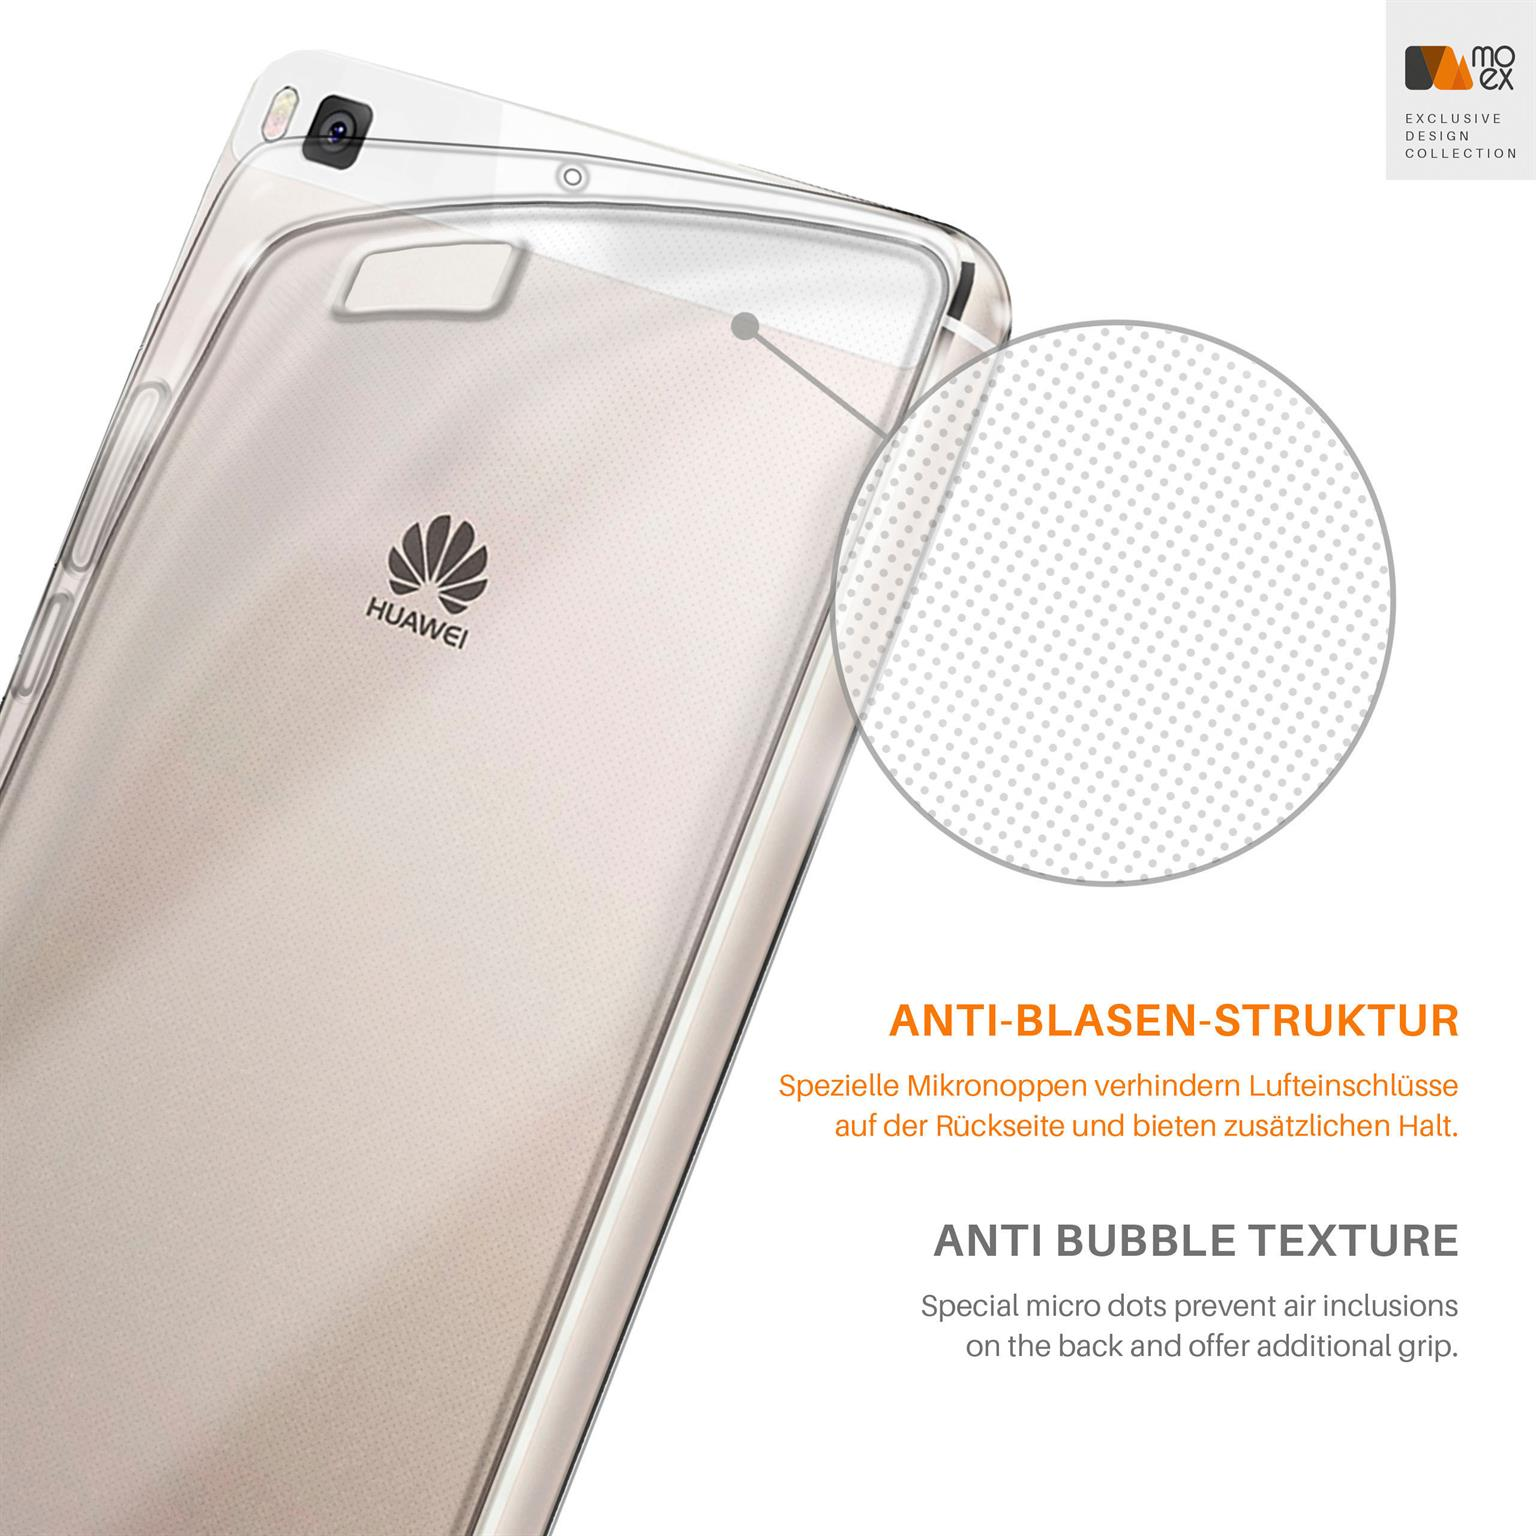 Huawei, P8, Backcover, Aero MOEX Case, Crystal-Clear